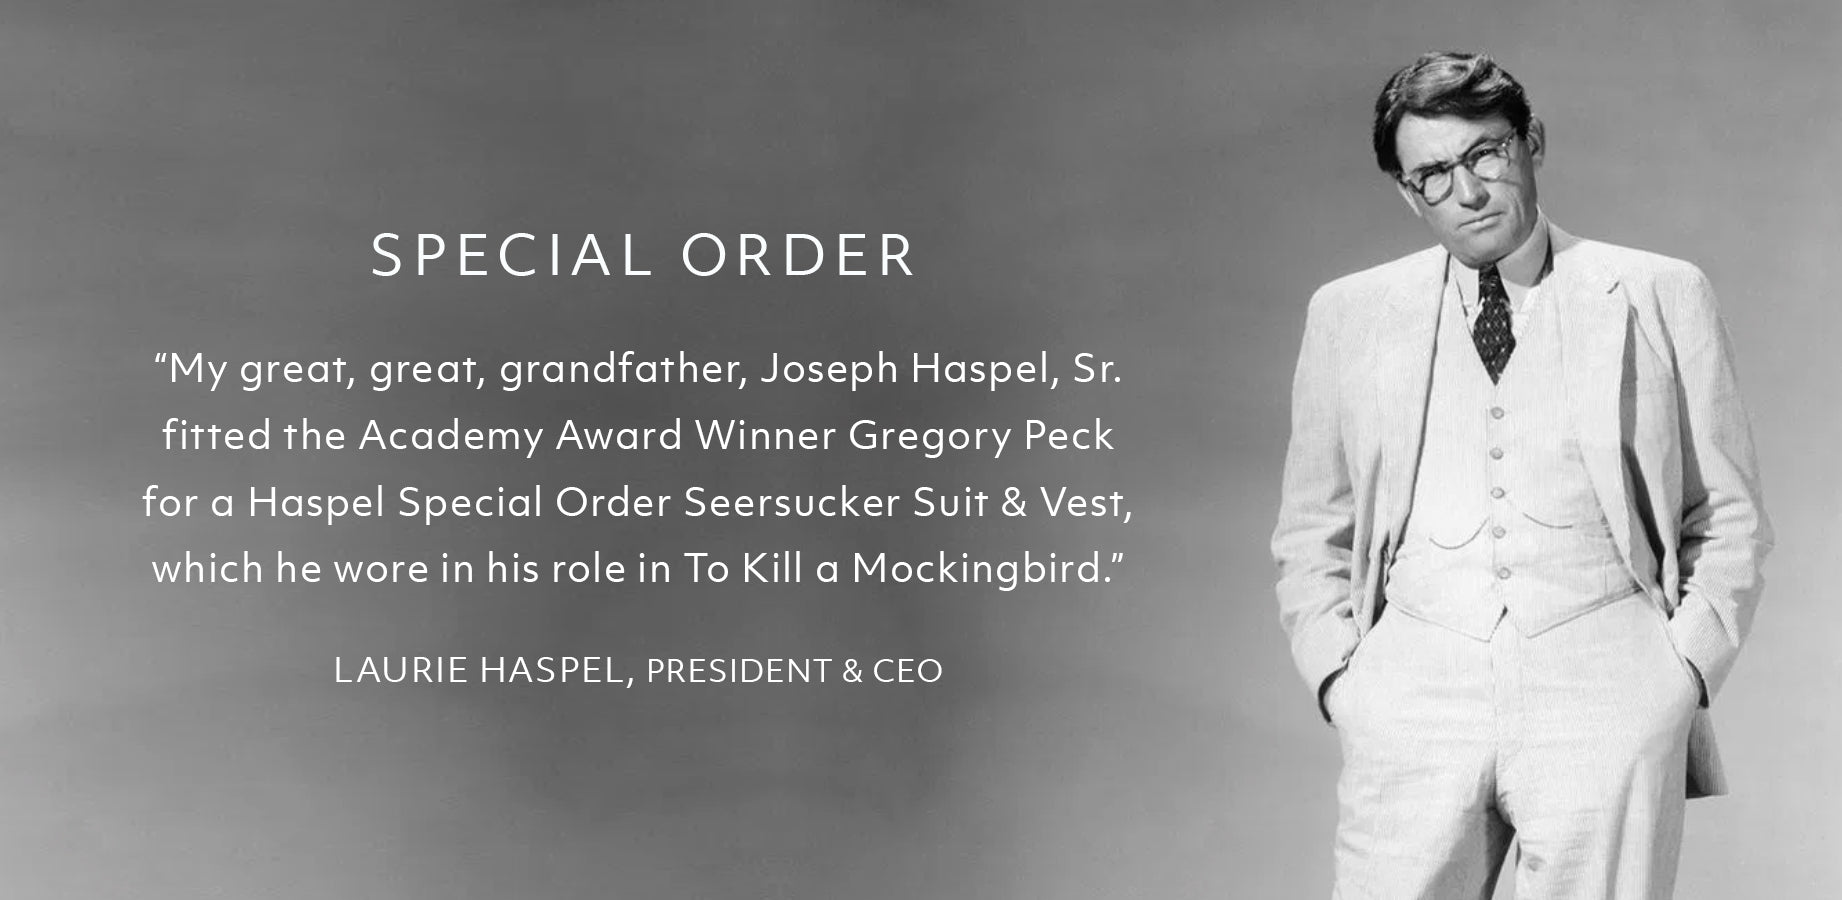 Special Order  “My great, great, grandfather, Joseph Haspel, Sr.  fitted the Academy Award Winner Gregory Peck  for a Haspel Special Order Seersucker Suit & Vest,  which he wore in his role in To Kill a Mockingbird.”  LAURIE HASPEL, PRESIDENT & CEO